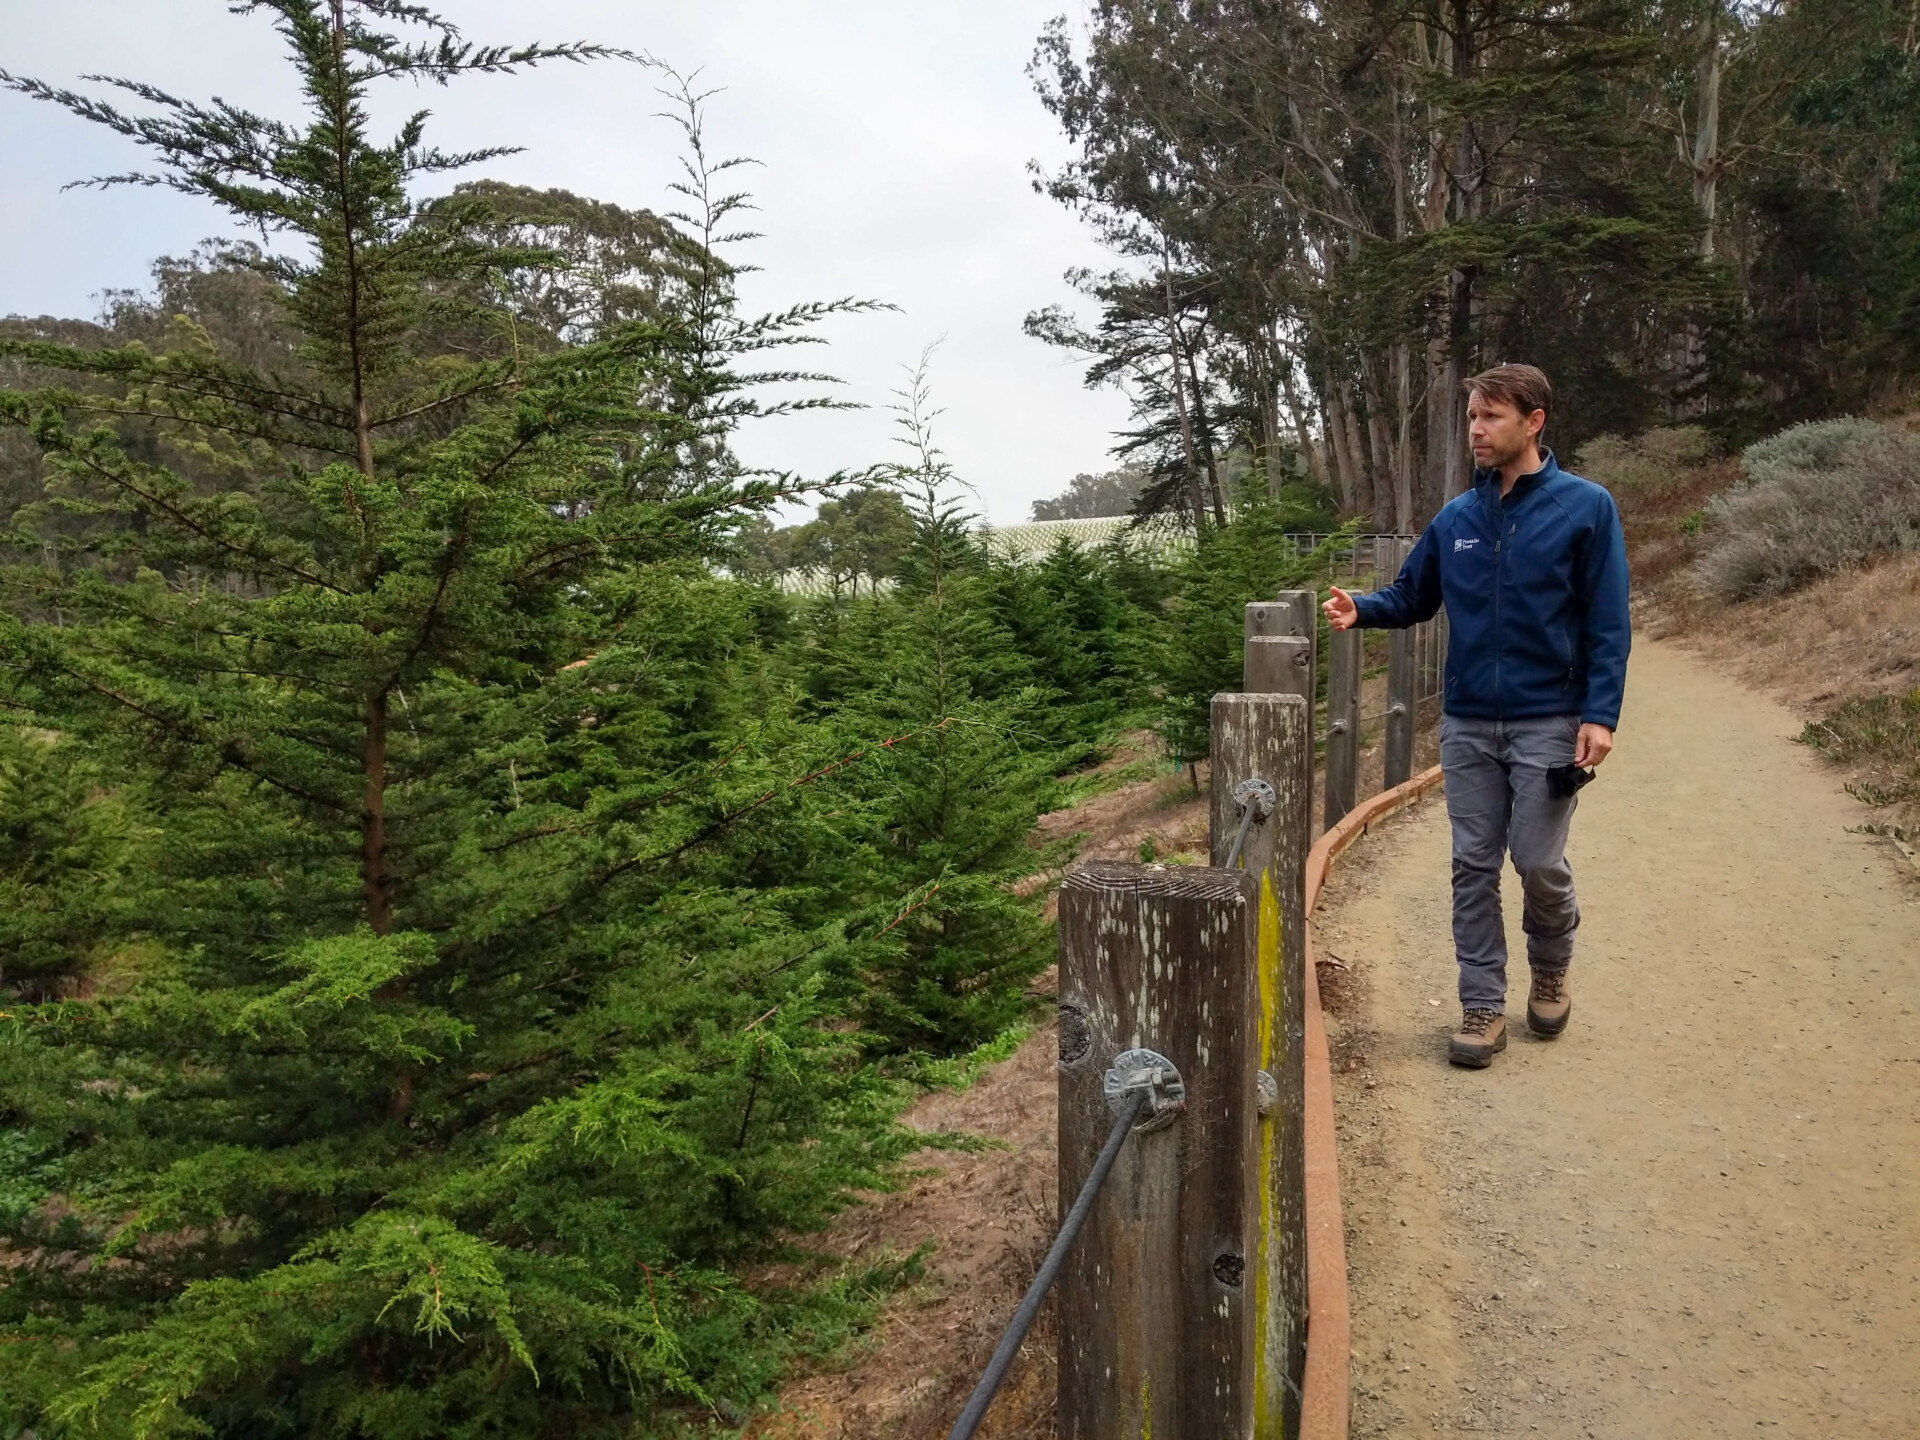 Photograph of Blake Troxel, former forester at the Presidio Trust, pointing out young Monterey cypress trees along the Park Trail